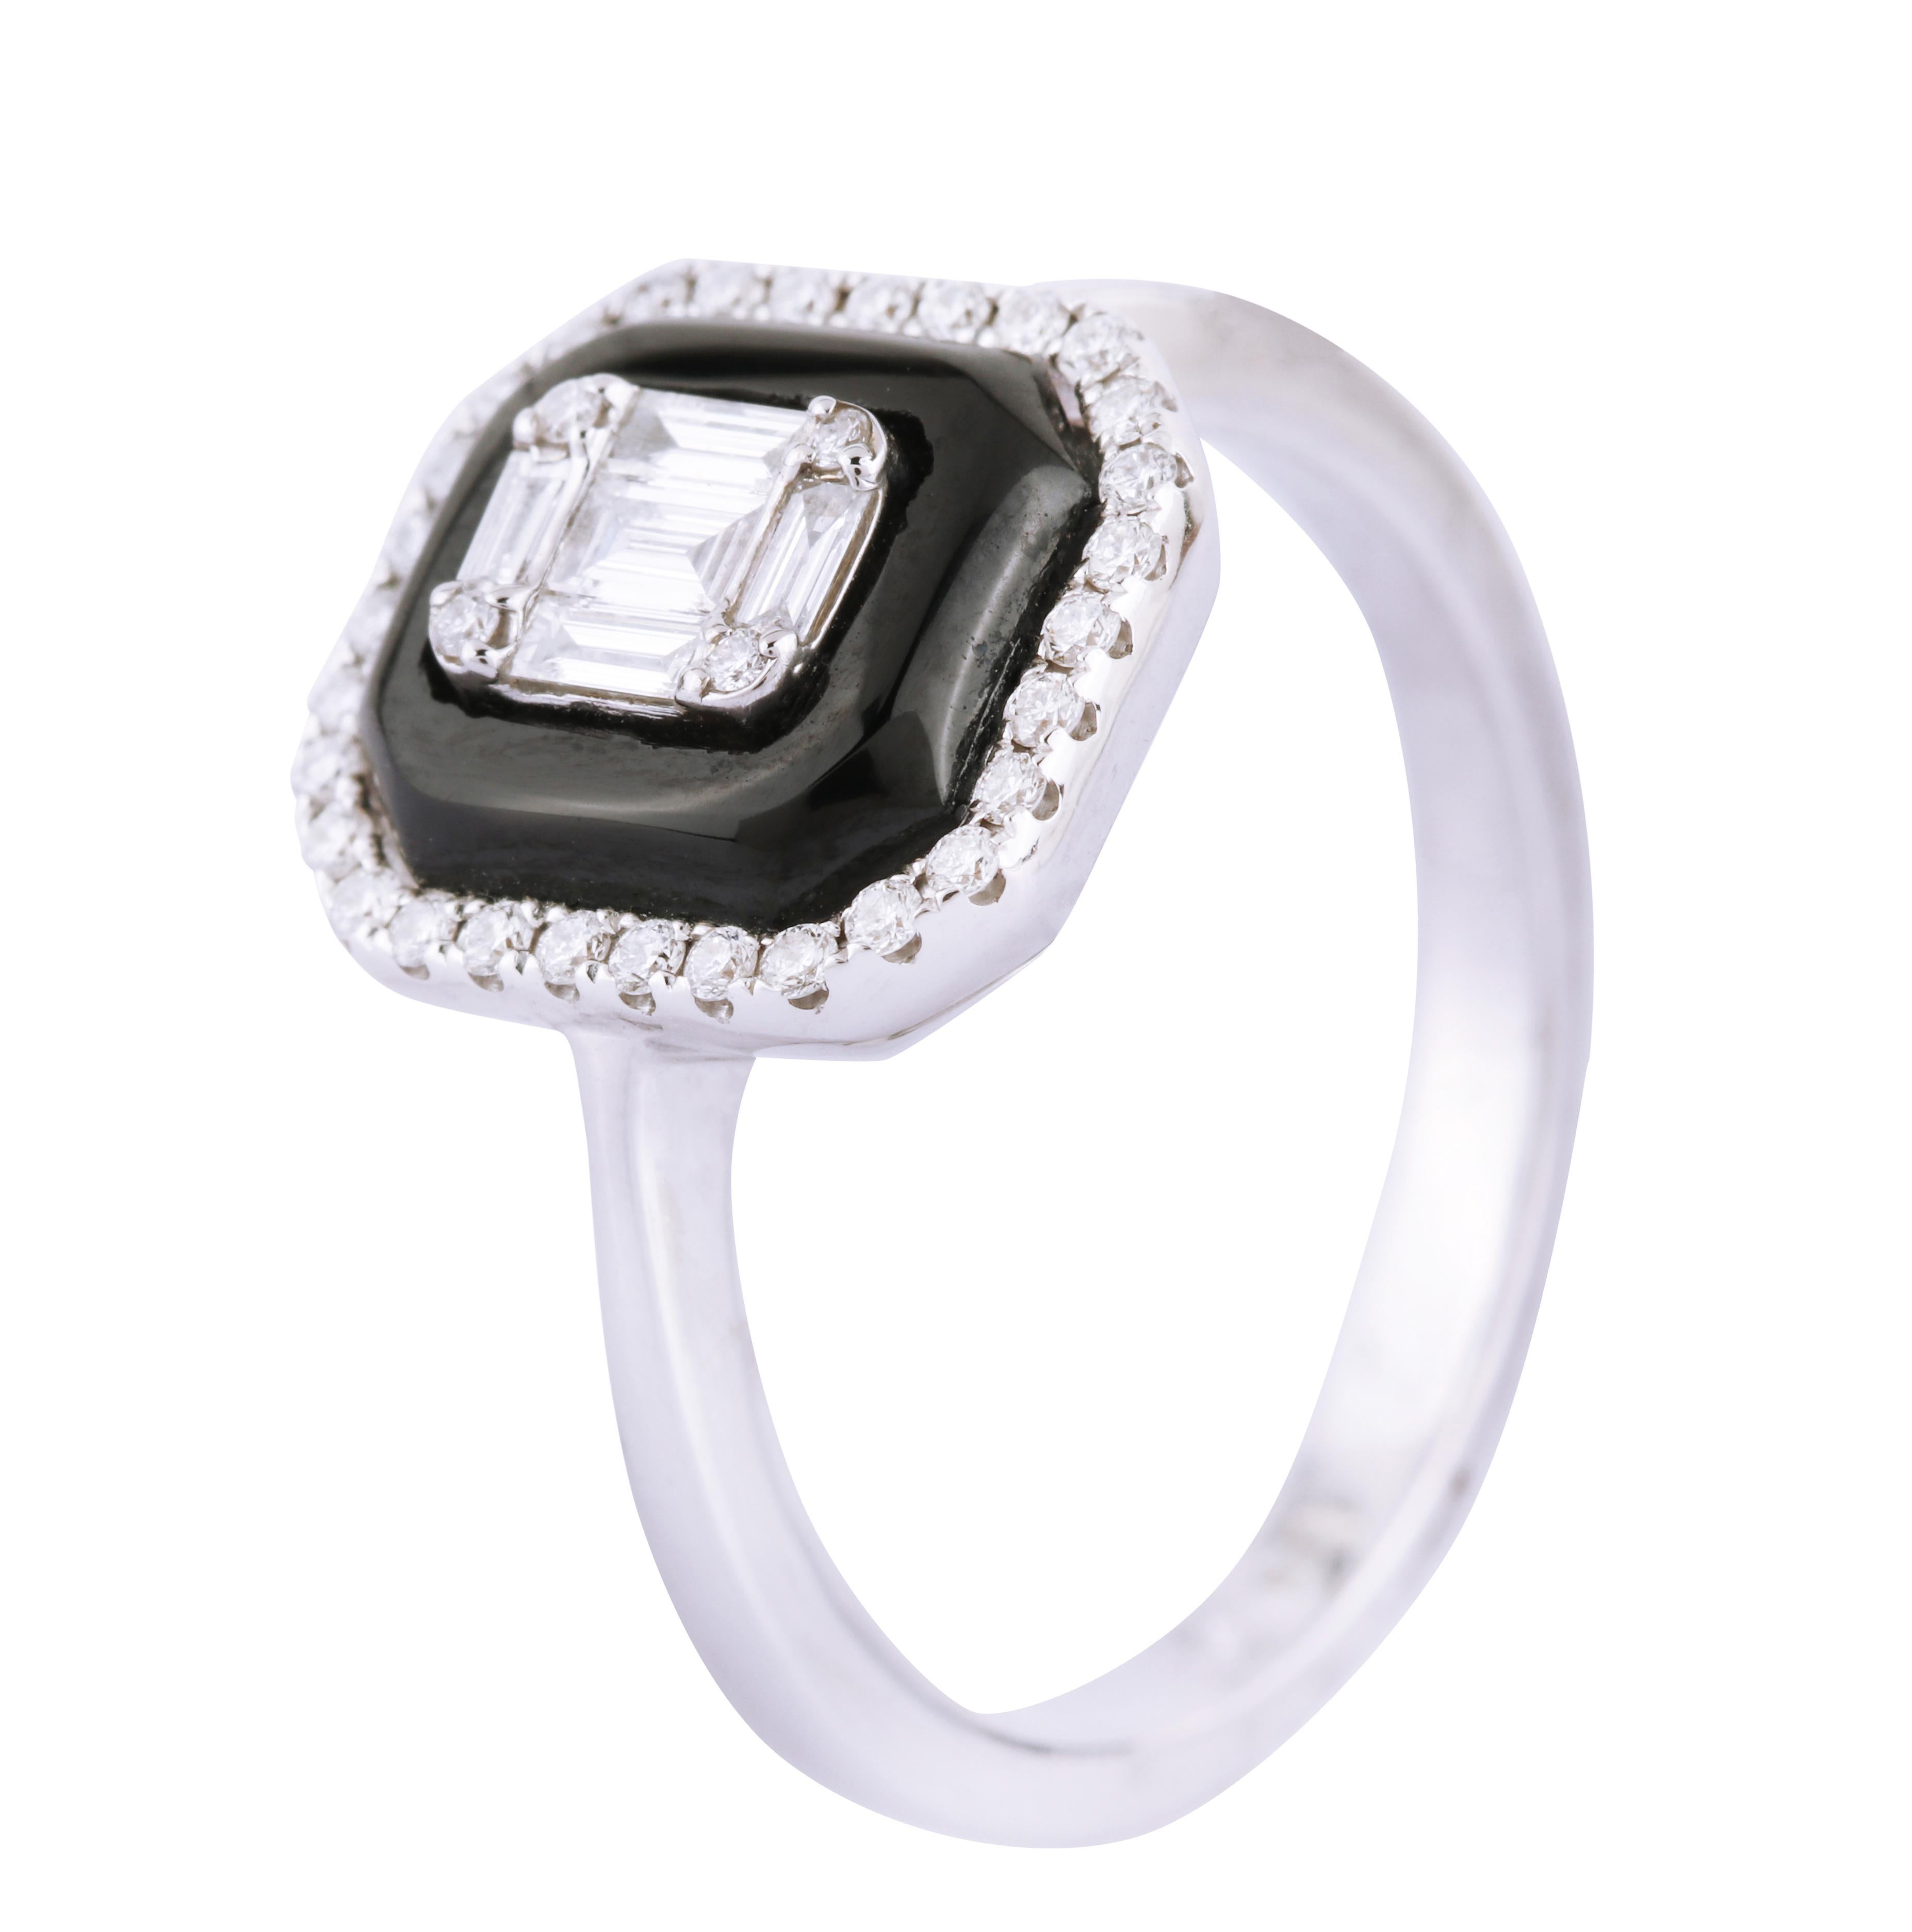 black onyx ring with diamond in center